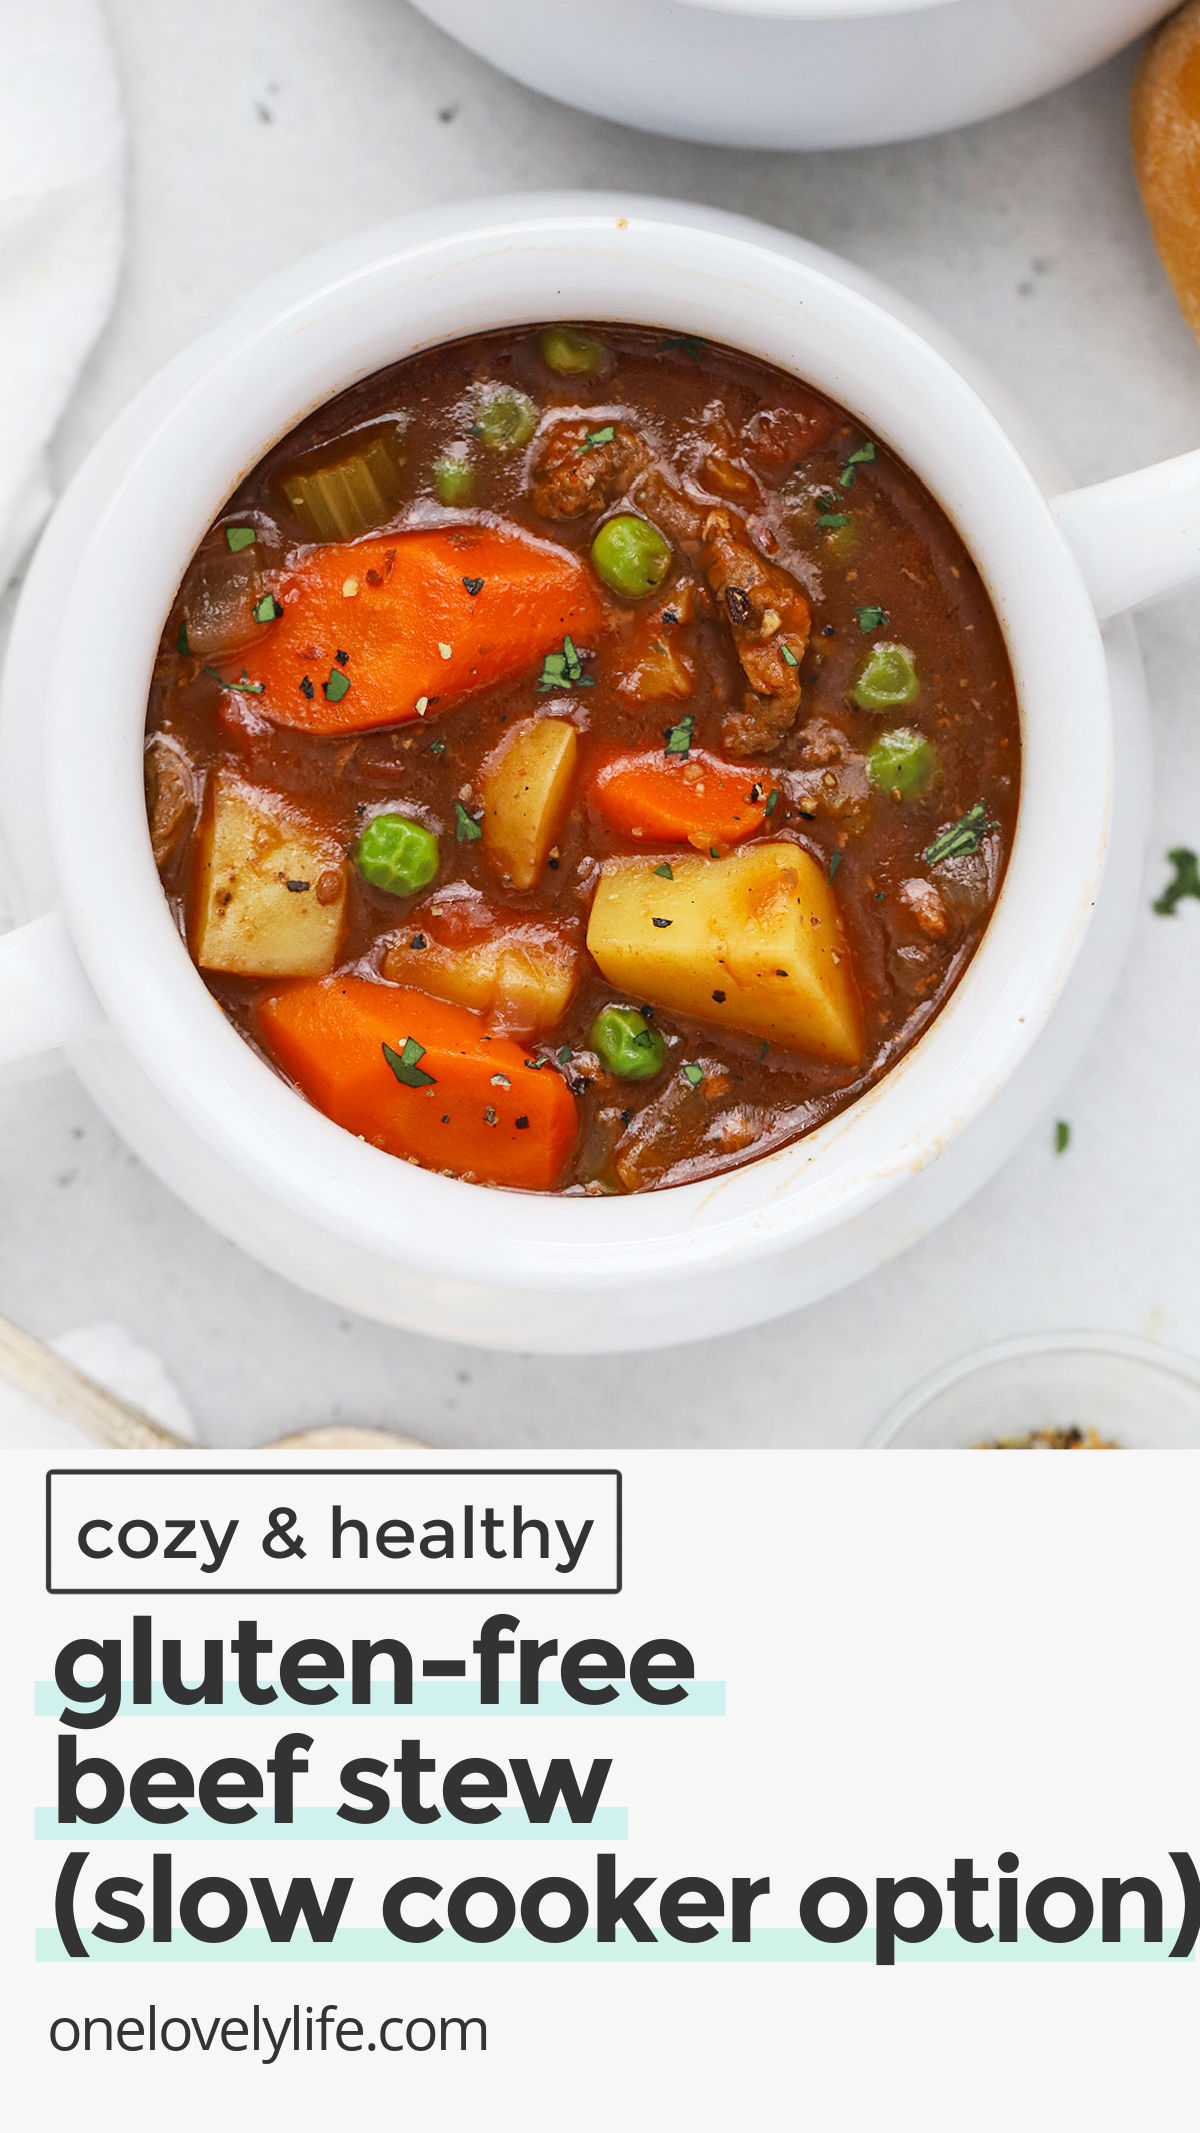 This Gluten-Free Beef Stew recipe is cozy, hearty & delicious. Make it on the stovetop, in the oven, or in the slow cooker. You'll love it! // slow cooker gluten-free beef stew recipe / healthy beef stew recipe / gluten-free dutch oven beef stew / beef stew in the oven / beef stew without flour / the best gluten-free beef stew recipe / healthy stew / slow cooker stew / stovetop beef stew